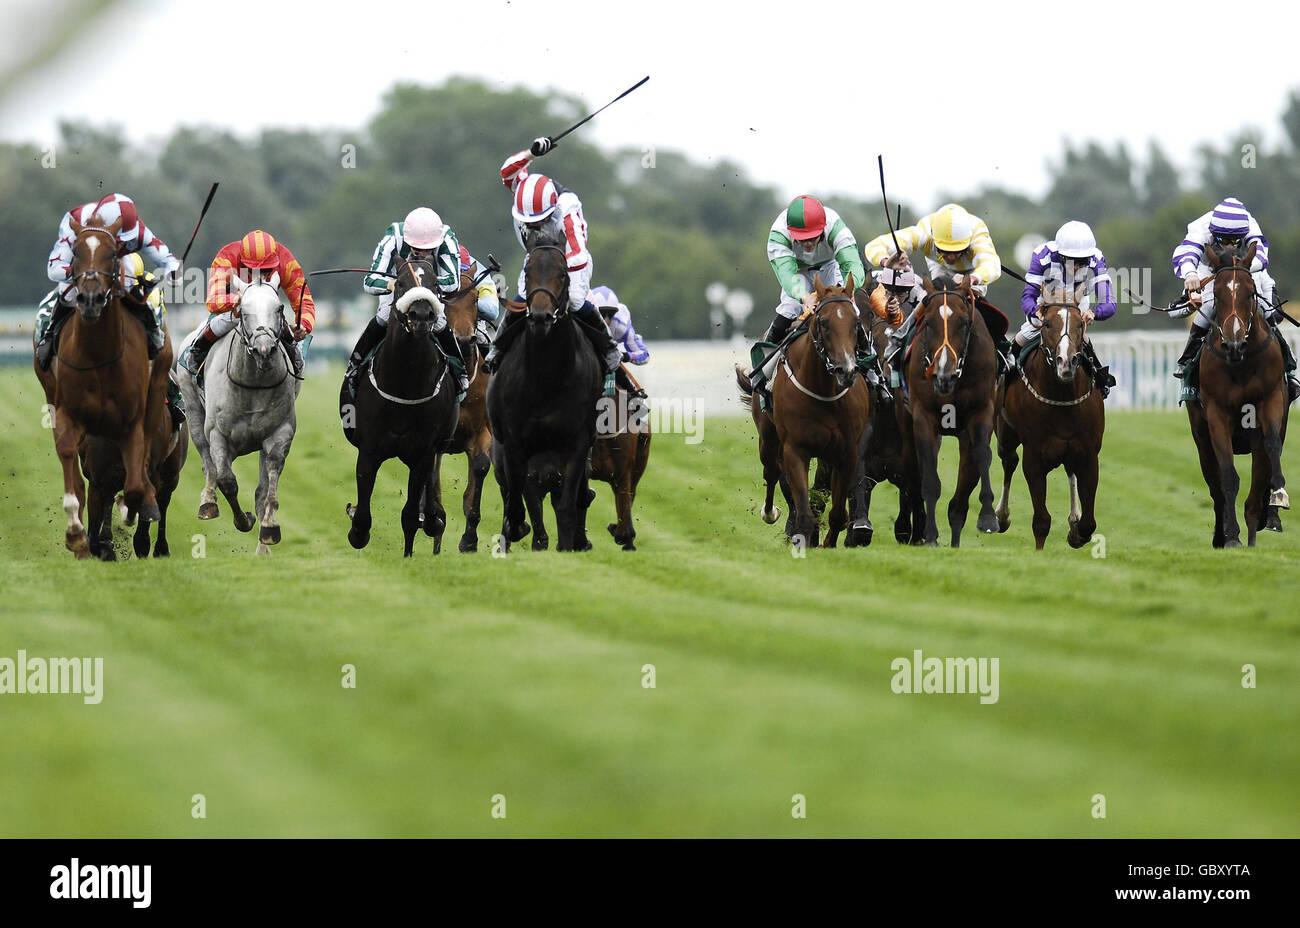 Monsieur Chevalier ridden by Richard Hughes (third right) races clear of the field to go on to win the Weatherbys Super Sprint during Weatherbys Super Sprint Day at Newbury Racecourse, Berkshire. Stock Photo